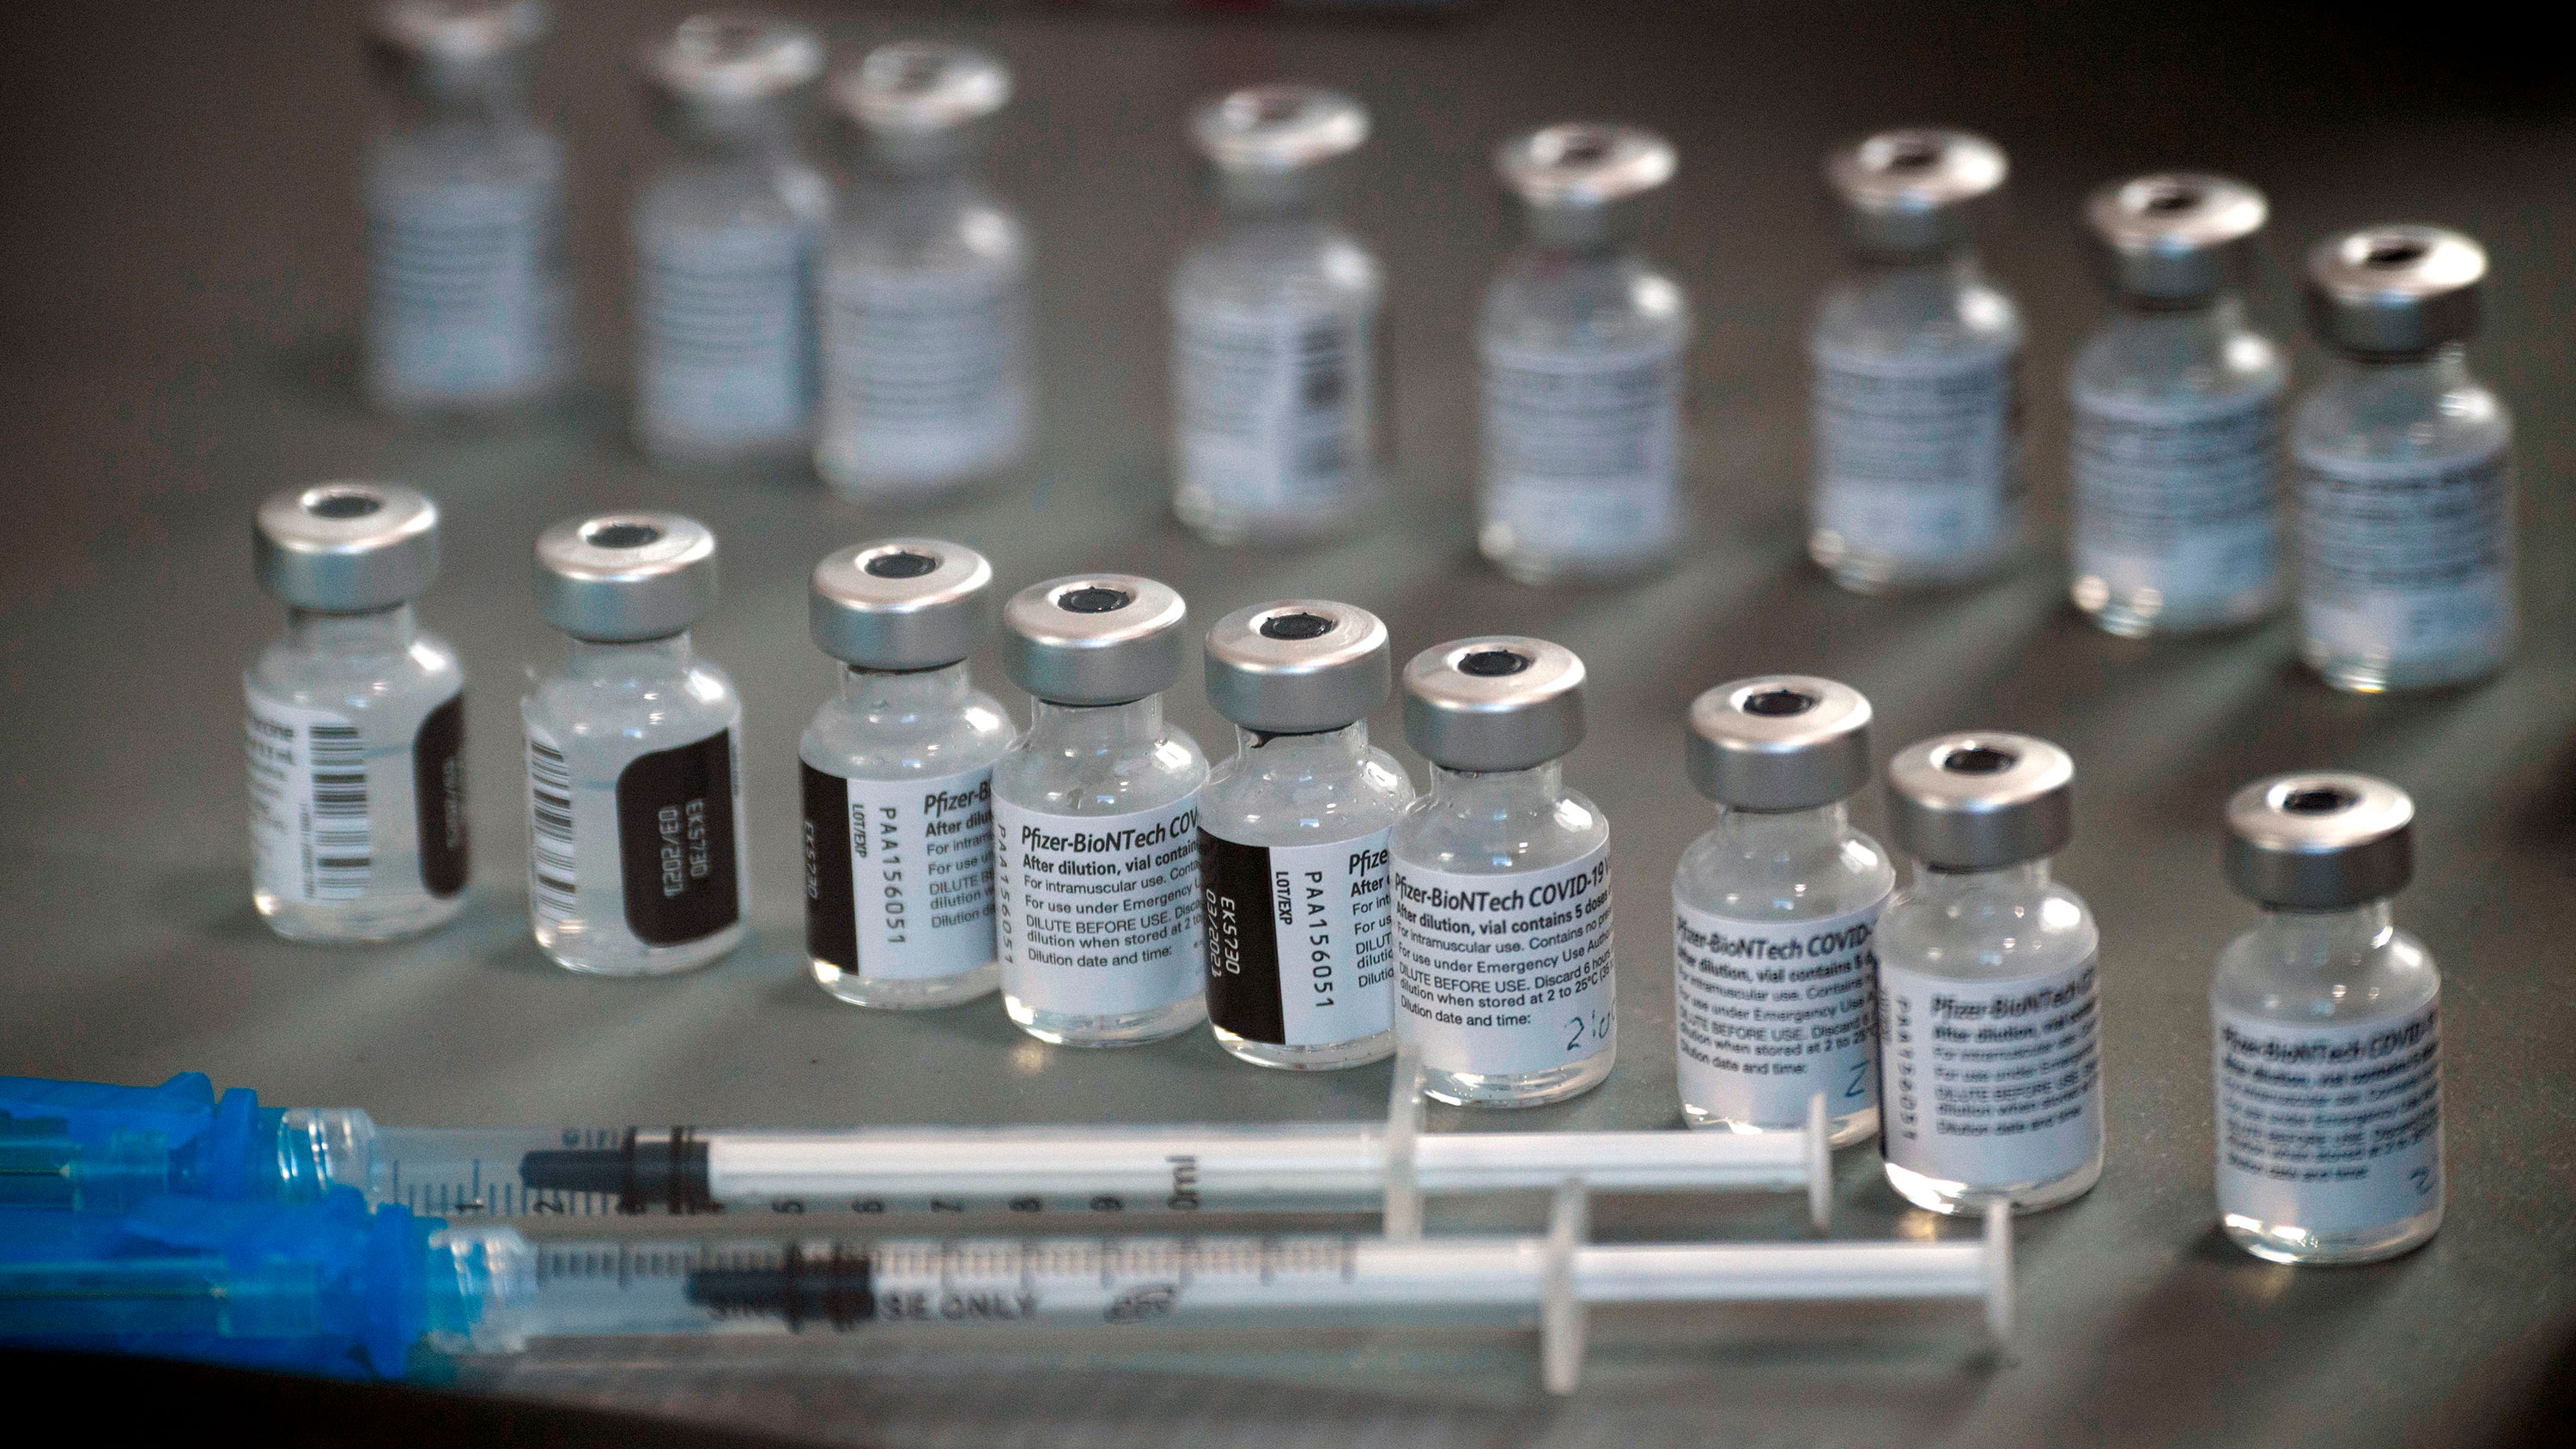 CNN’s Ryan Young reports why some black Americans are hesitant to receive the Covid-19 vaccine